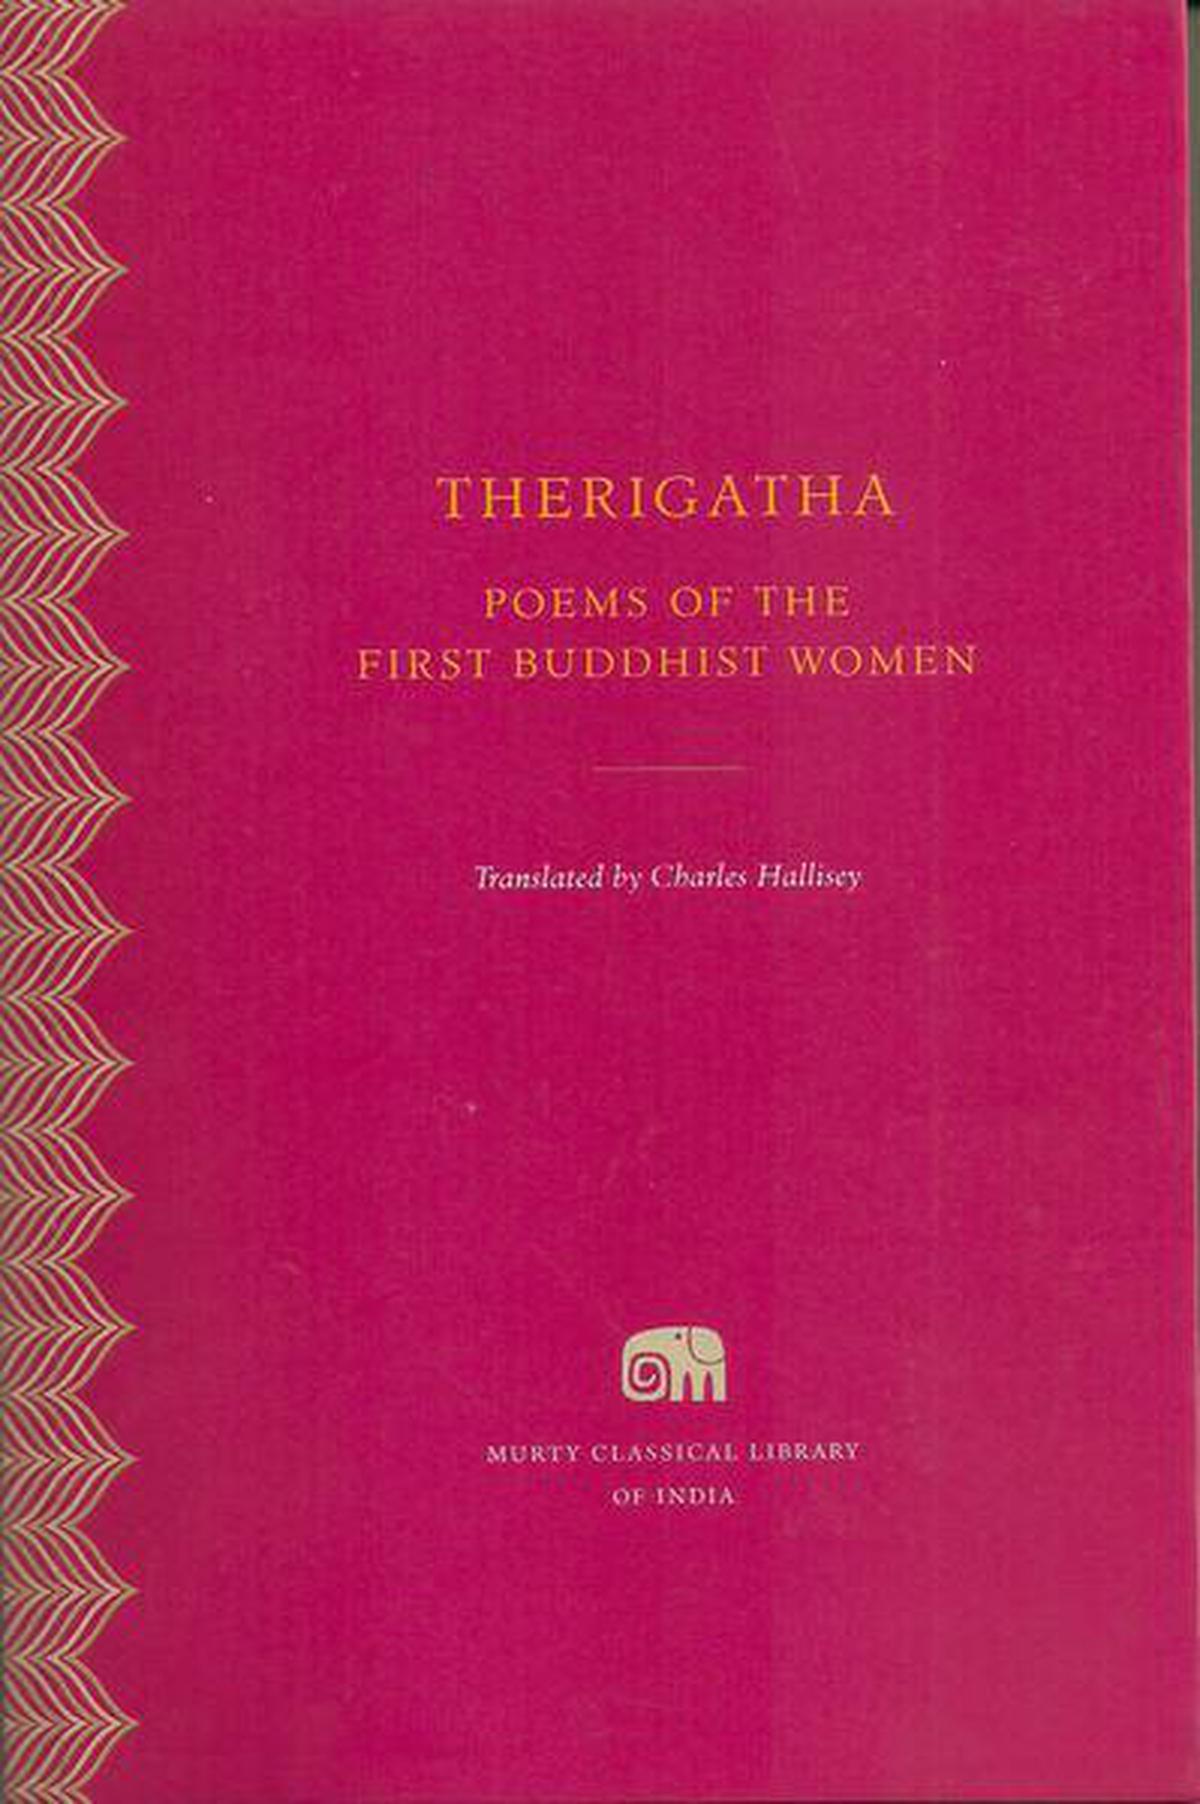 The Buddhist text ‘Therigatha’ is the world’s first anthology of women poets.